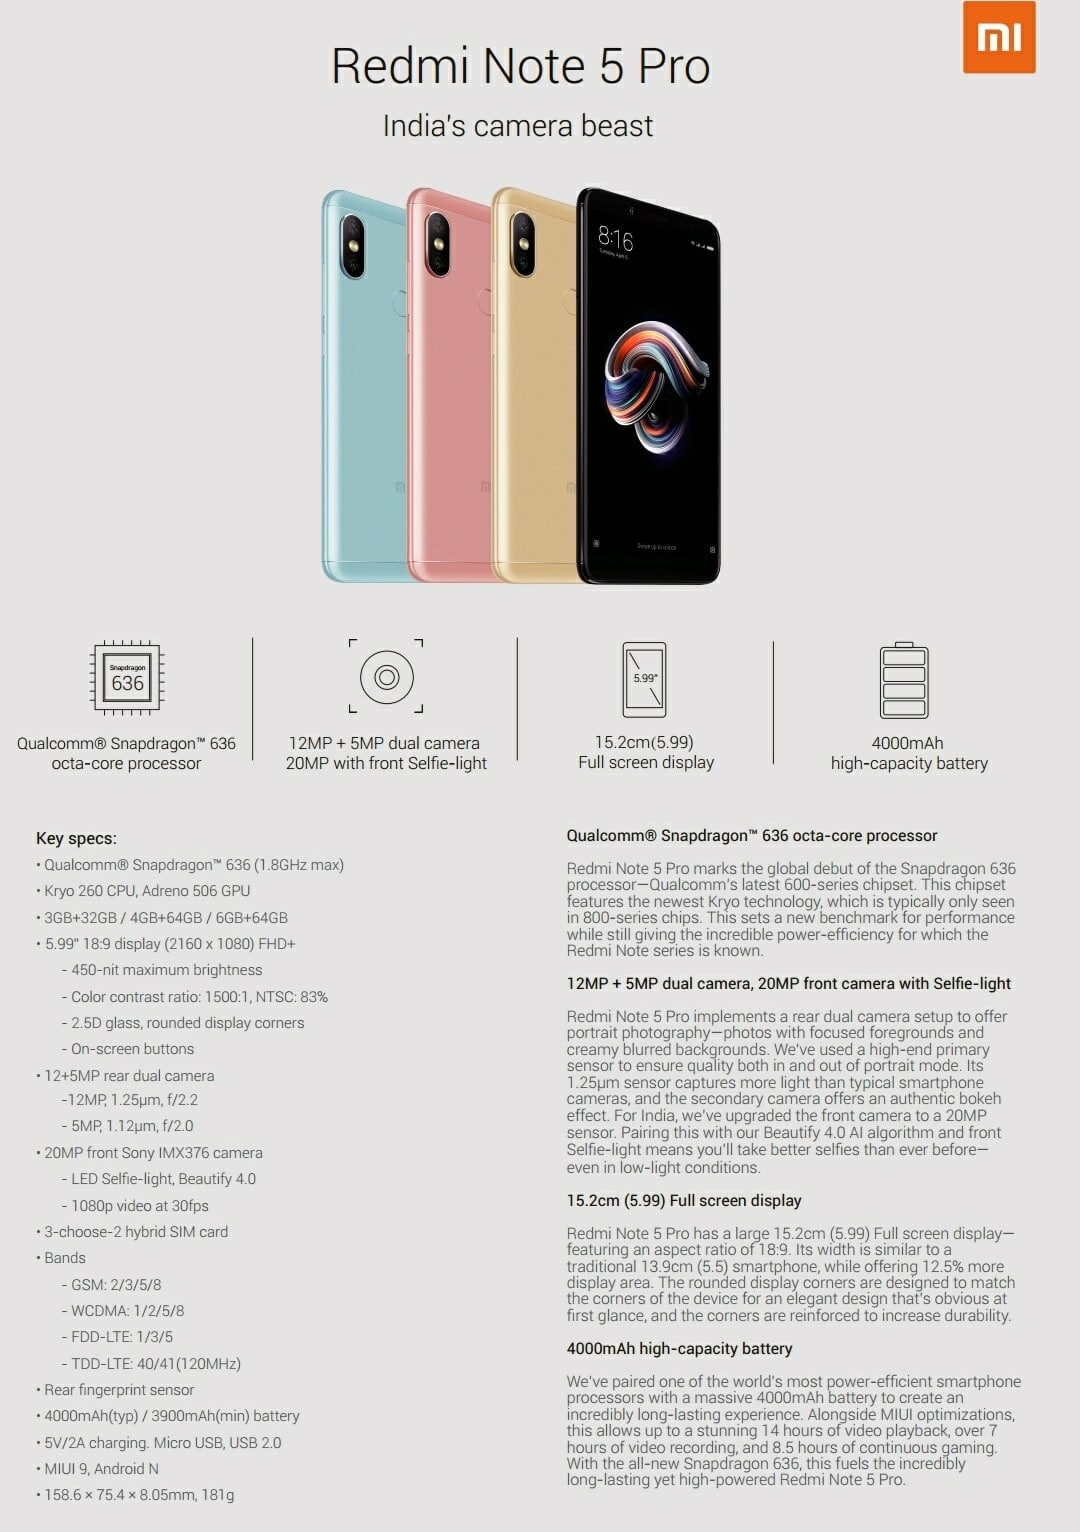 India' camera beast "Redmi Note 5 pro" specifications and available colors